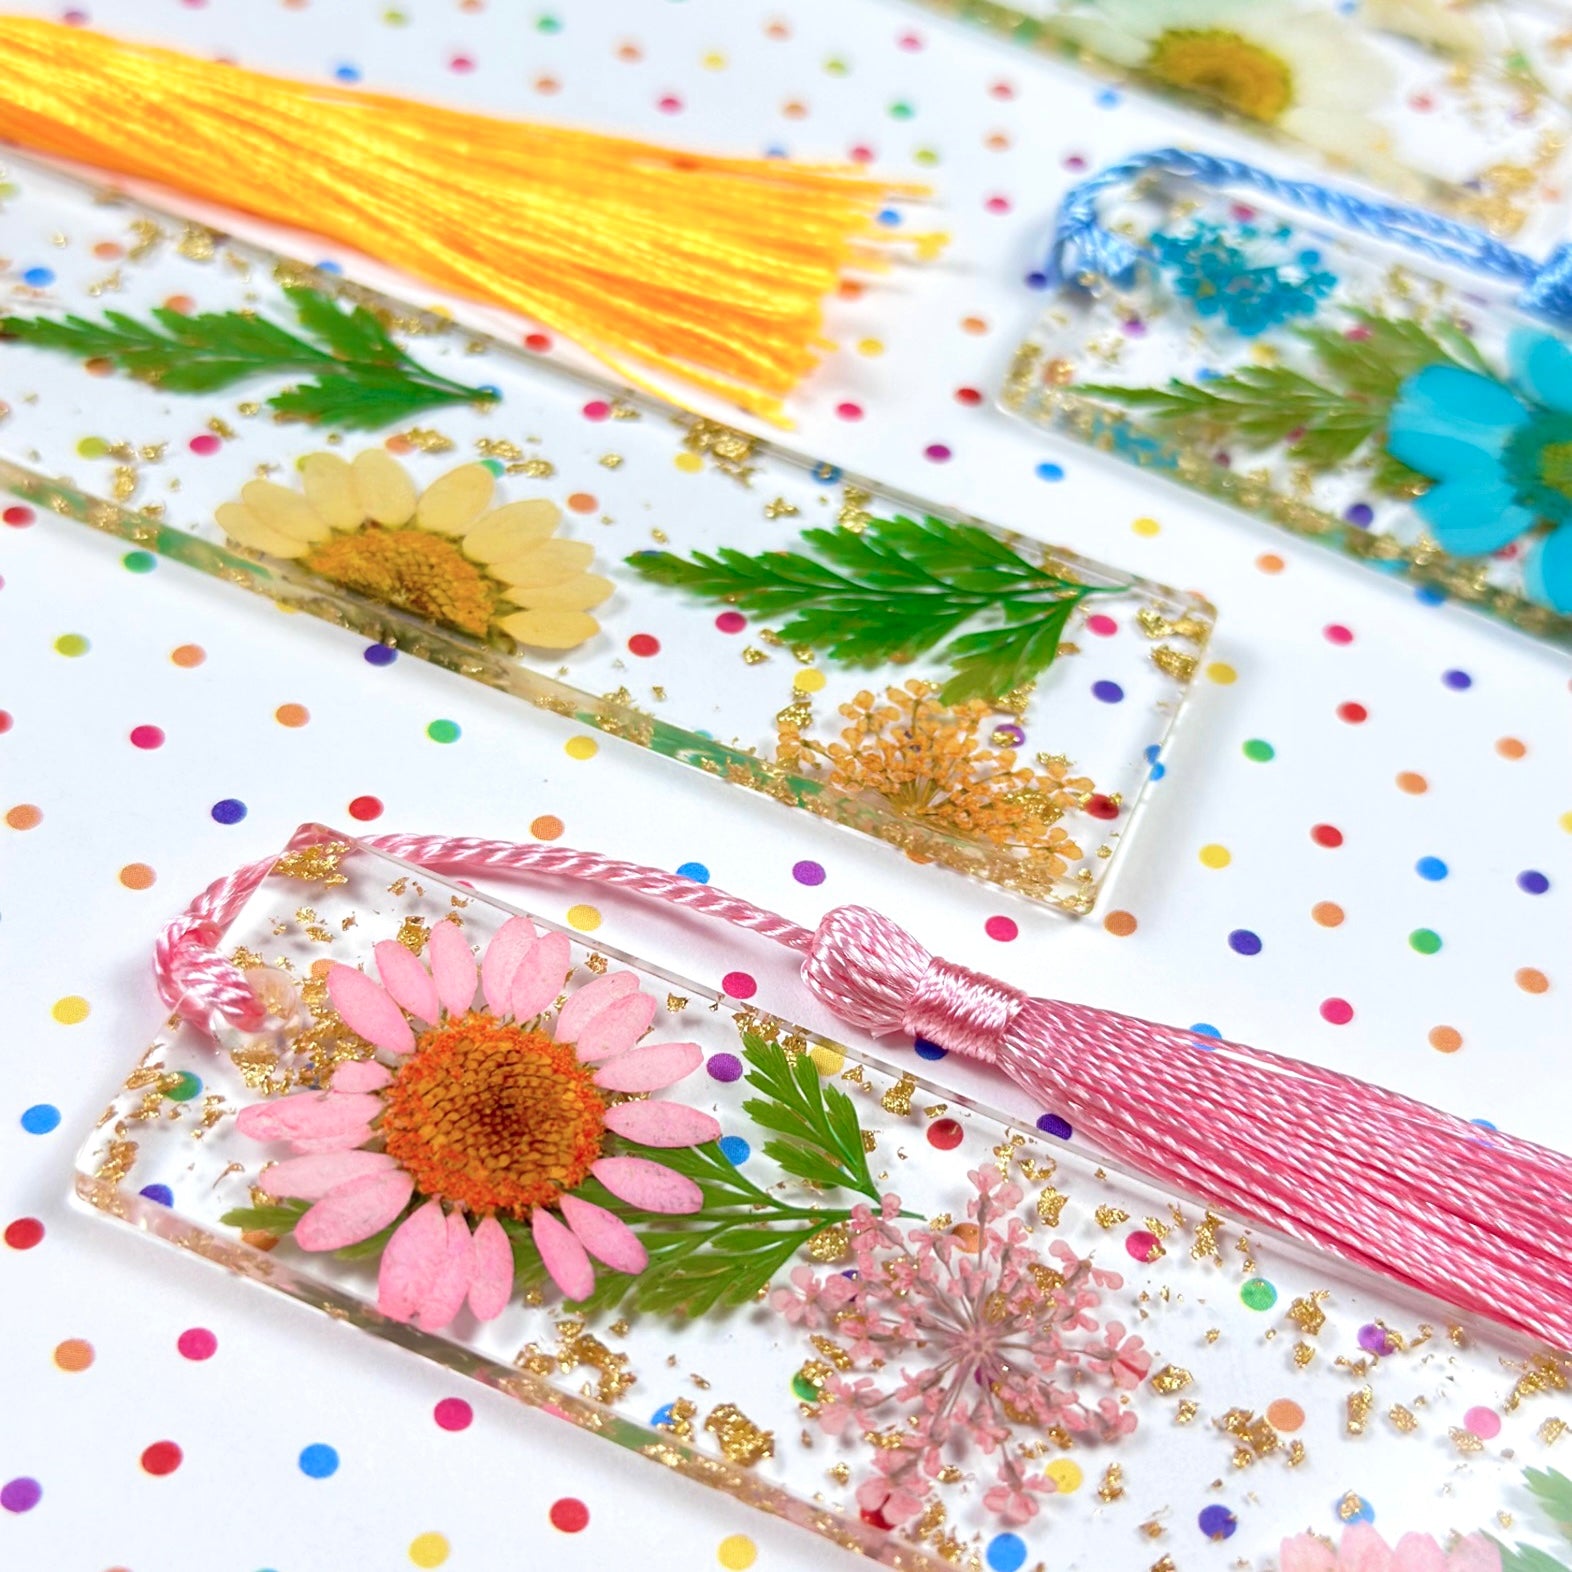 2Pcs Dried Flower Resin Bookmarks Dried Flower Page Markers Floral Bookmarks  Student Gifts 